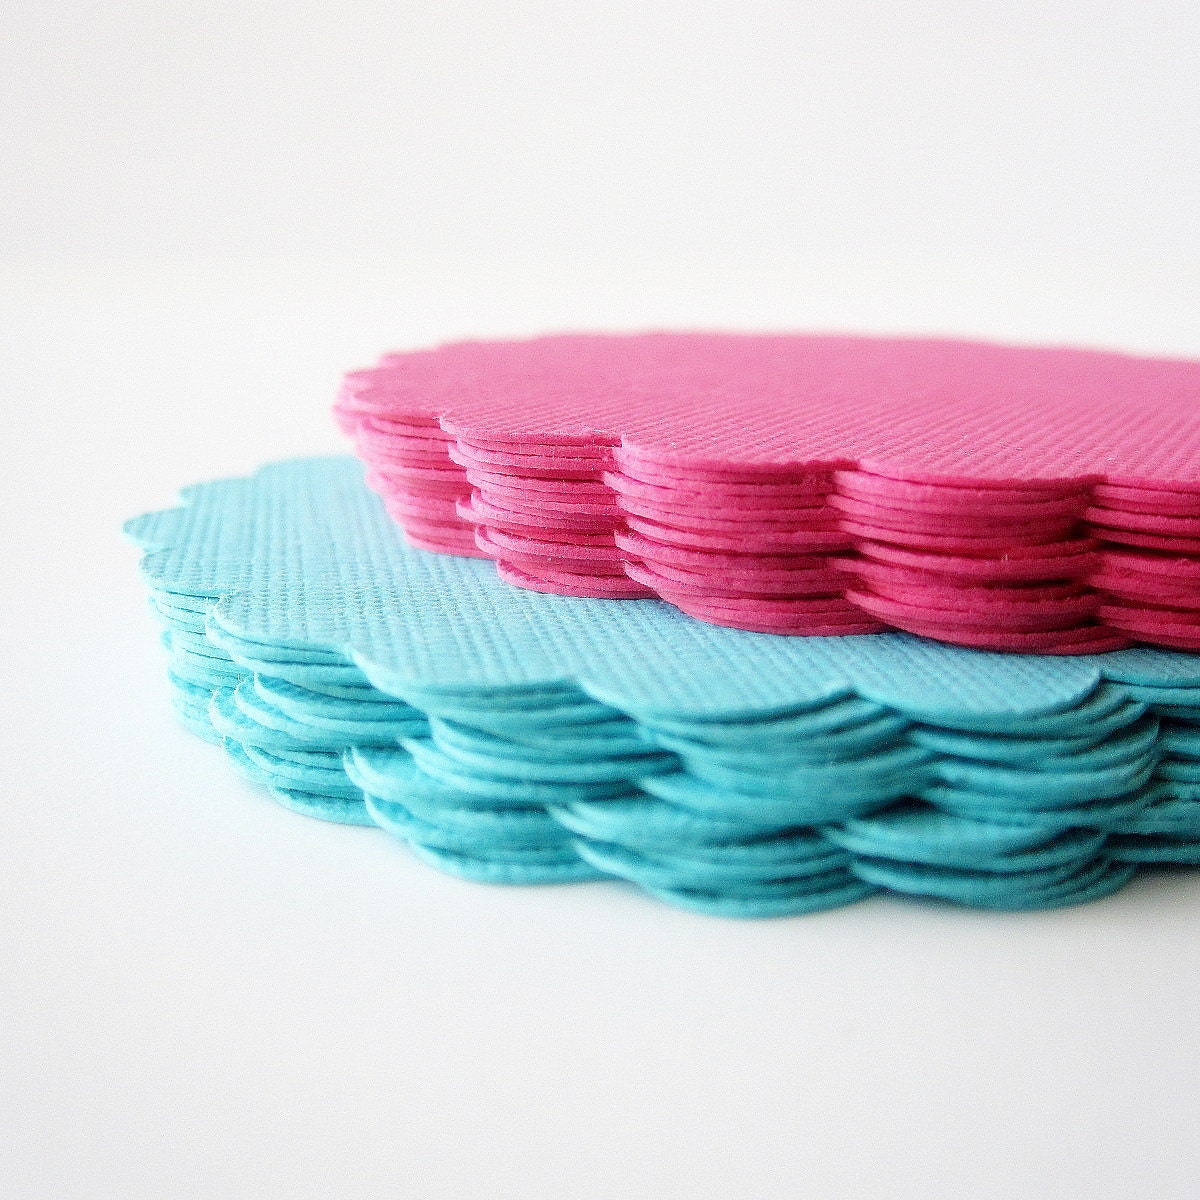 32 Scalloped Circles (2.5 inches) in Teal and Hot Pink paper Textured Cardstock - Mariapalito